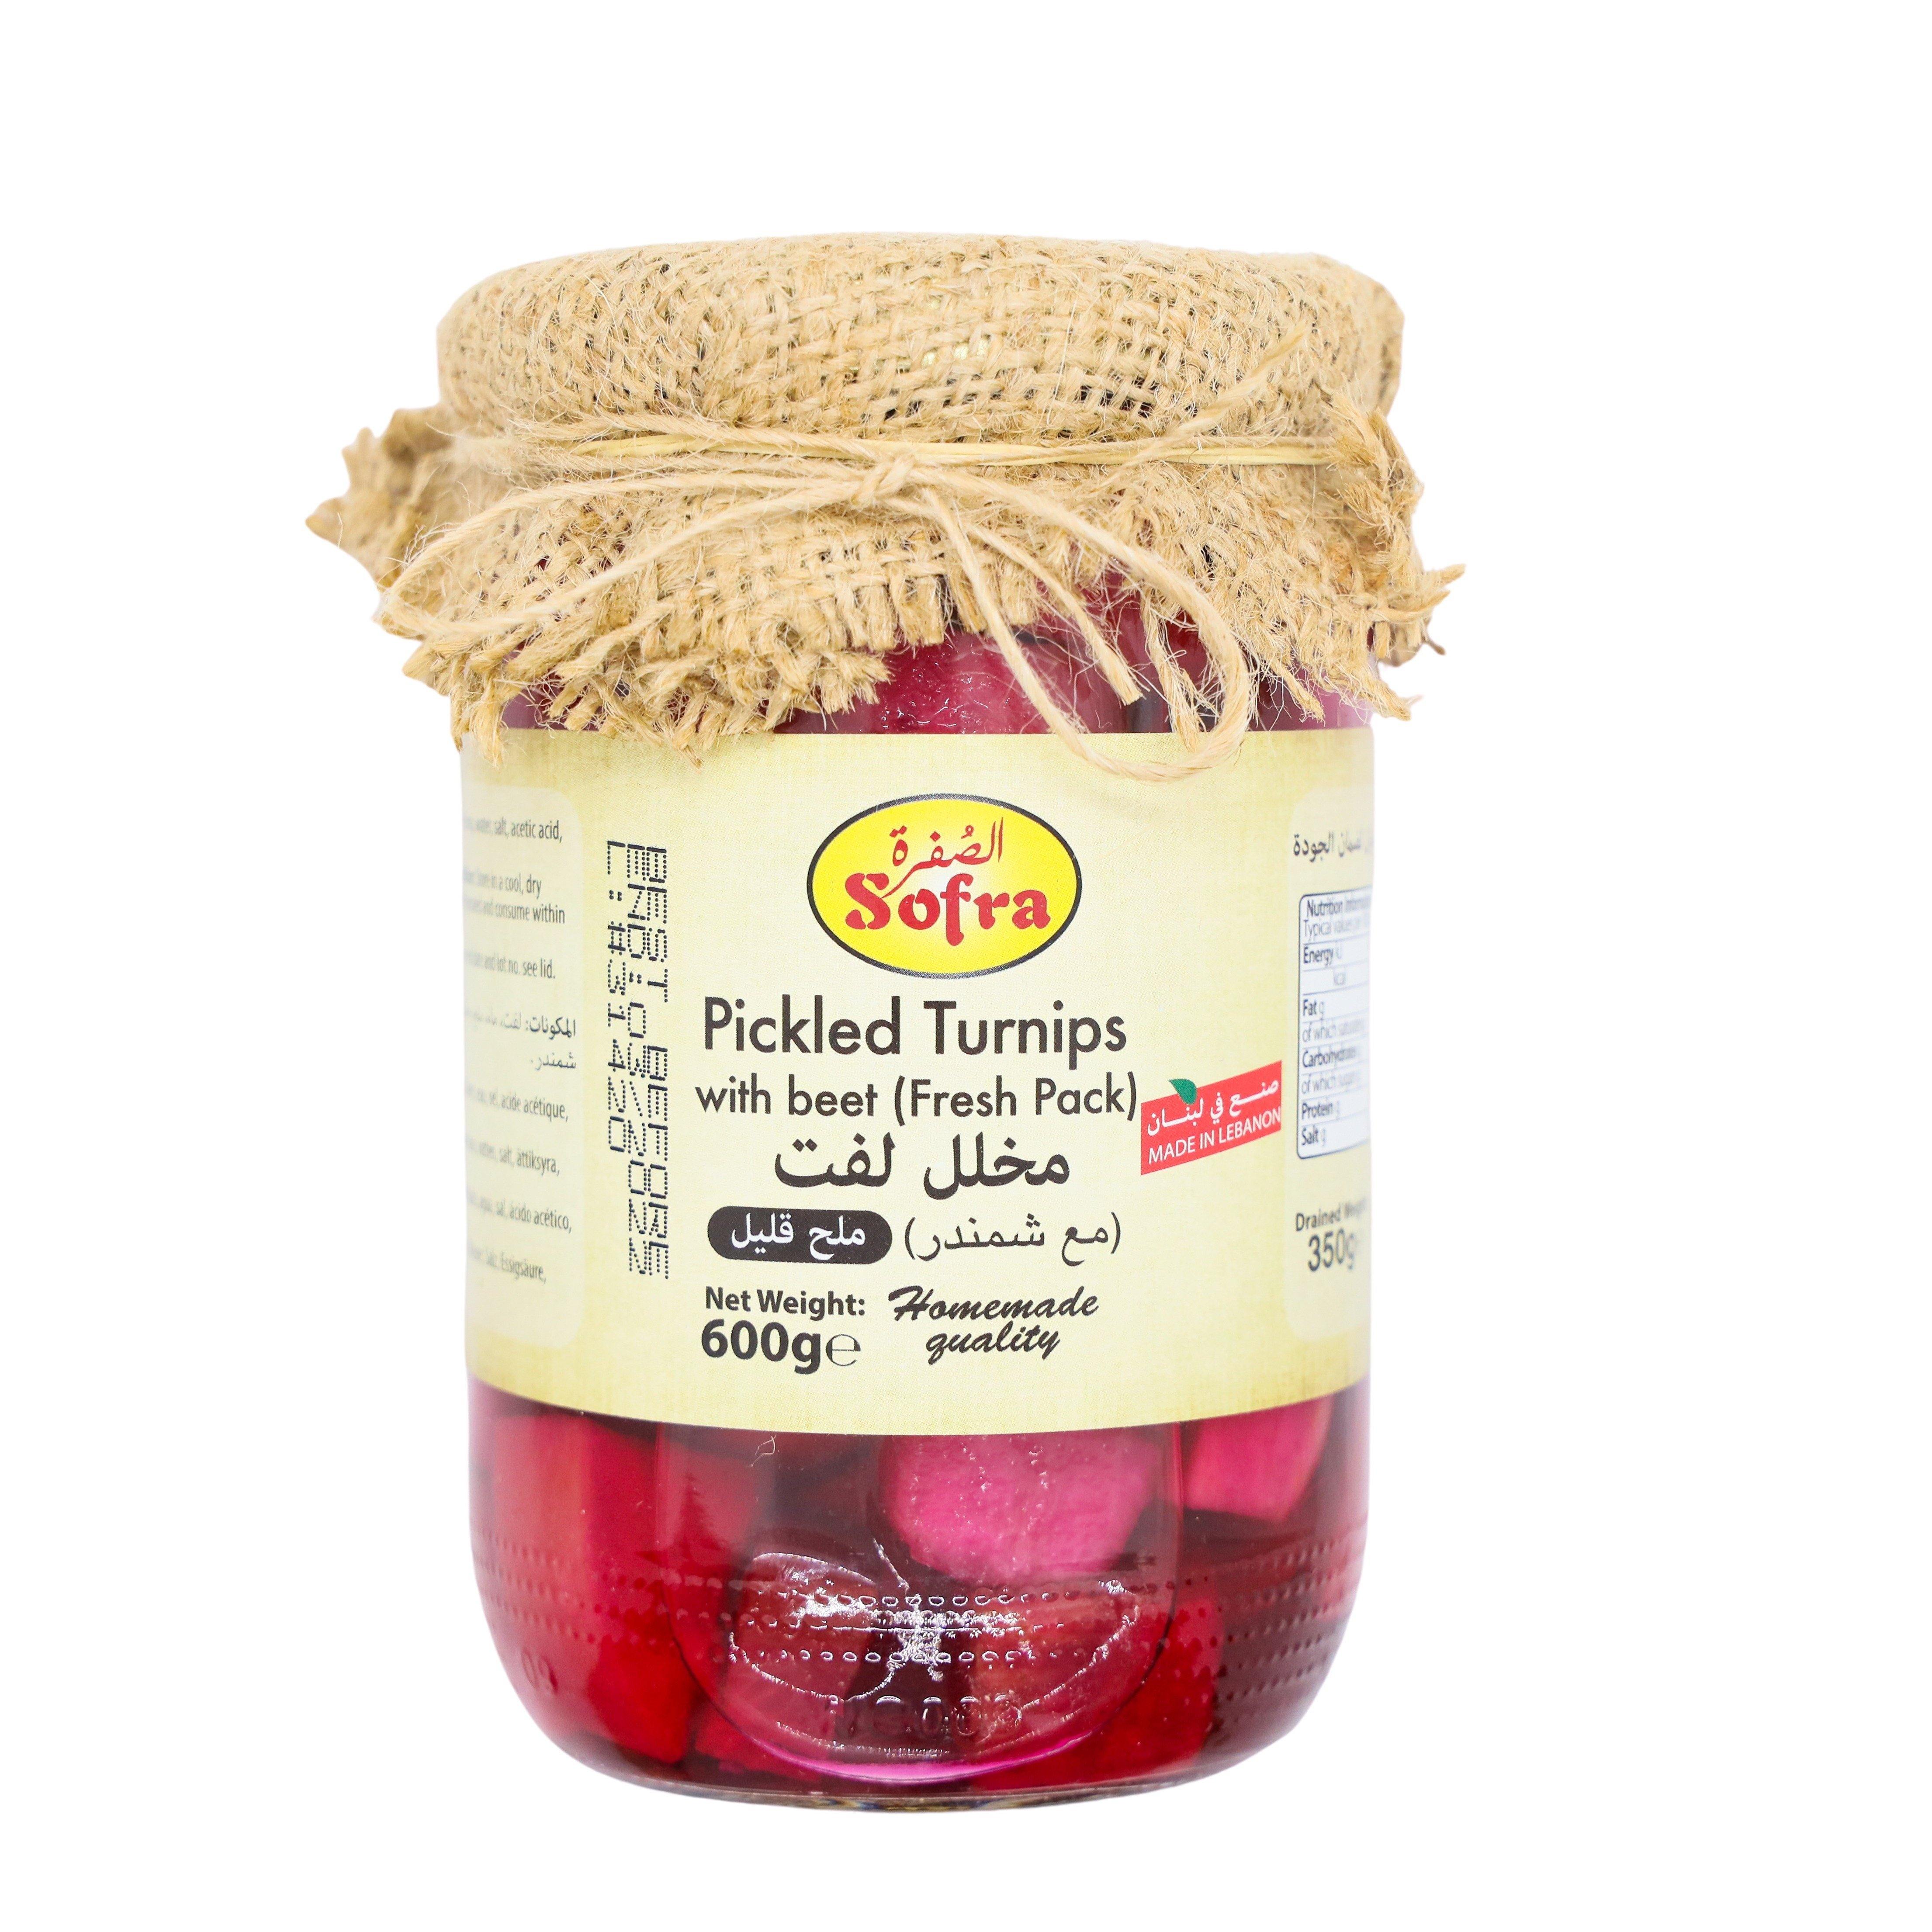 Sofra pickled turnips with beet SaveCo Online Ltd